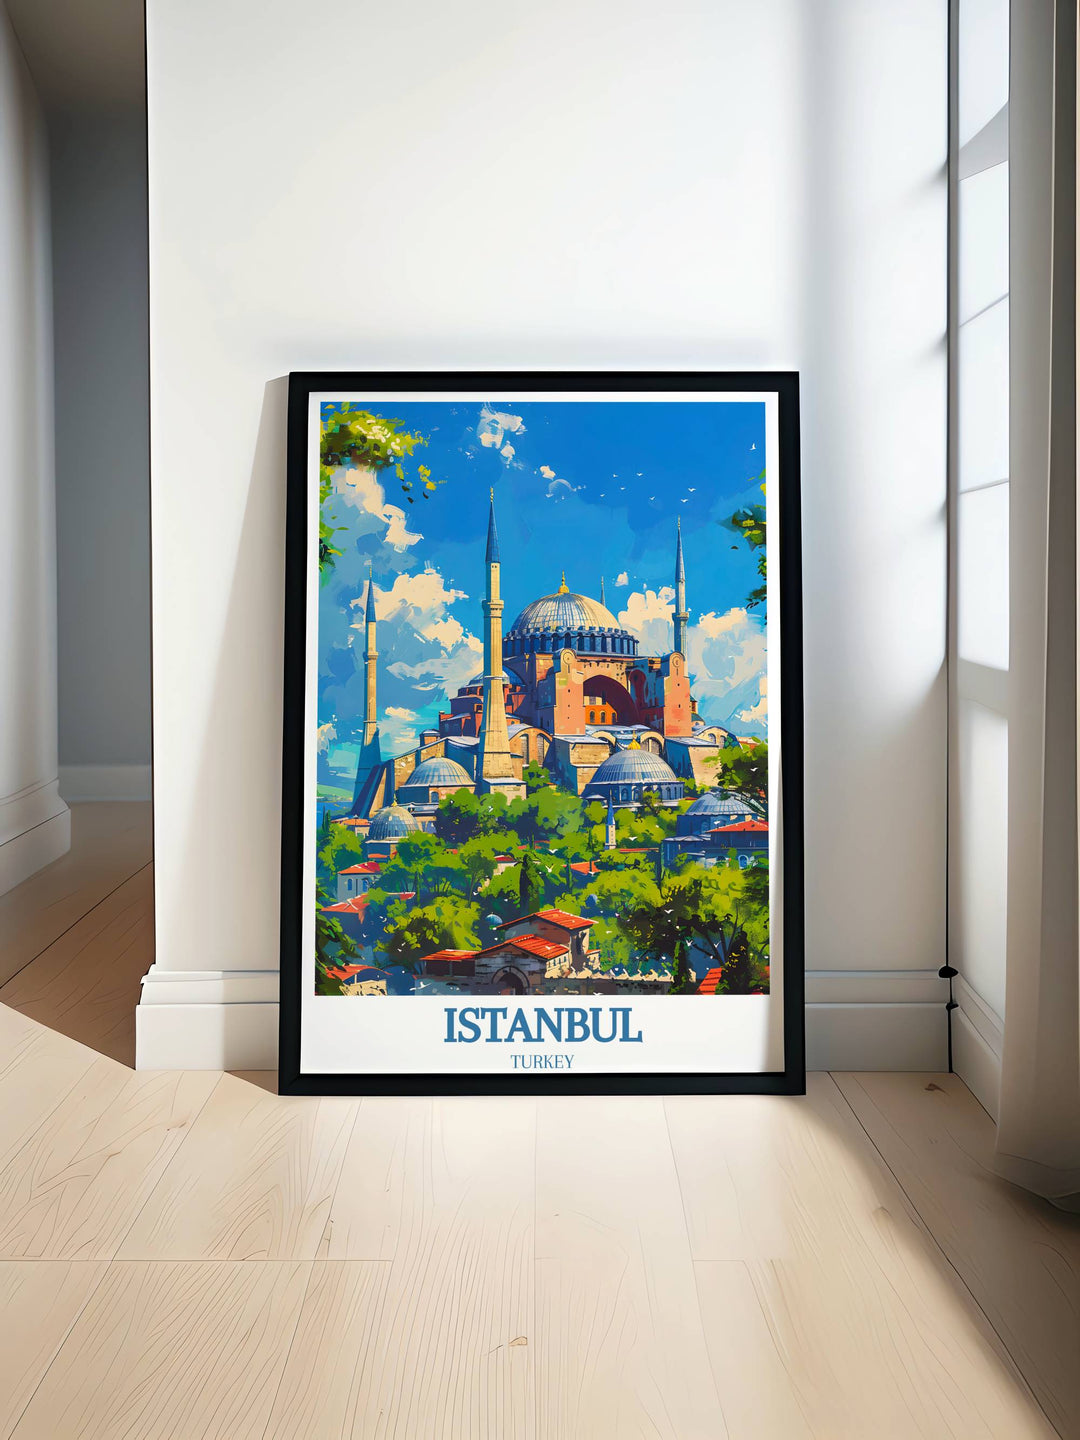 Vibrant Istanbul city print showcasing the Hagia Sophia, capturing its architectural grandeur and historical significance in Turkish culture.